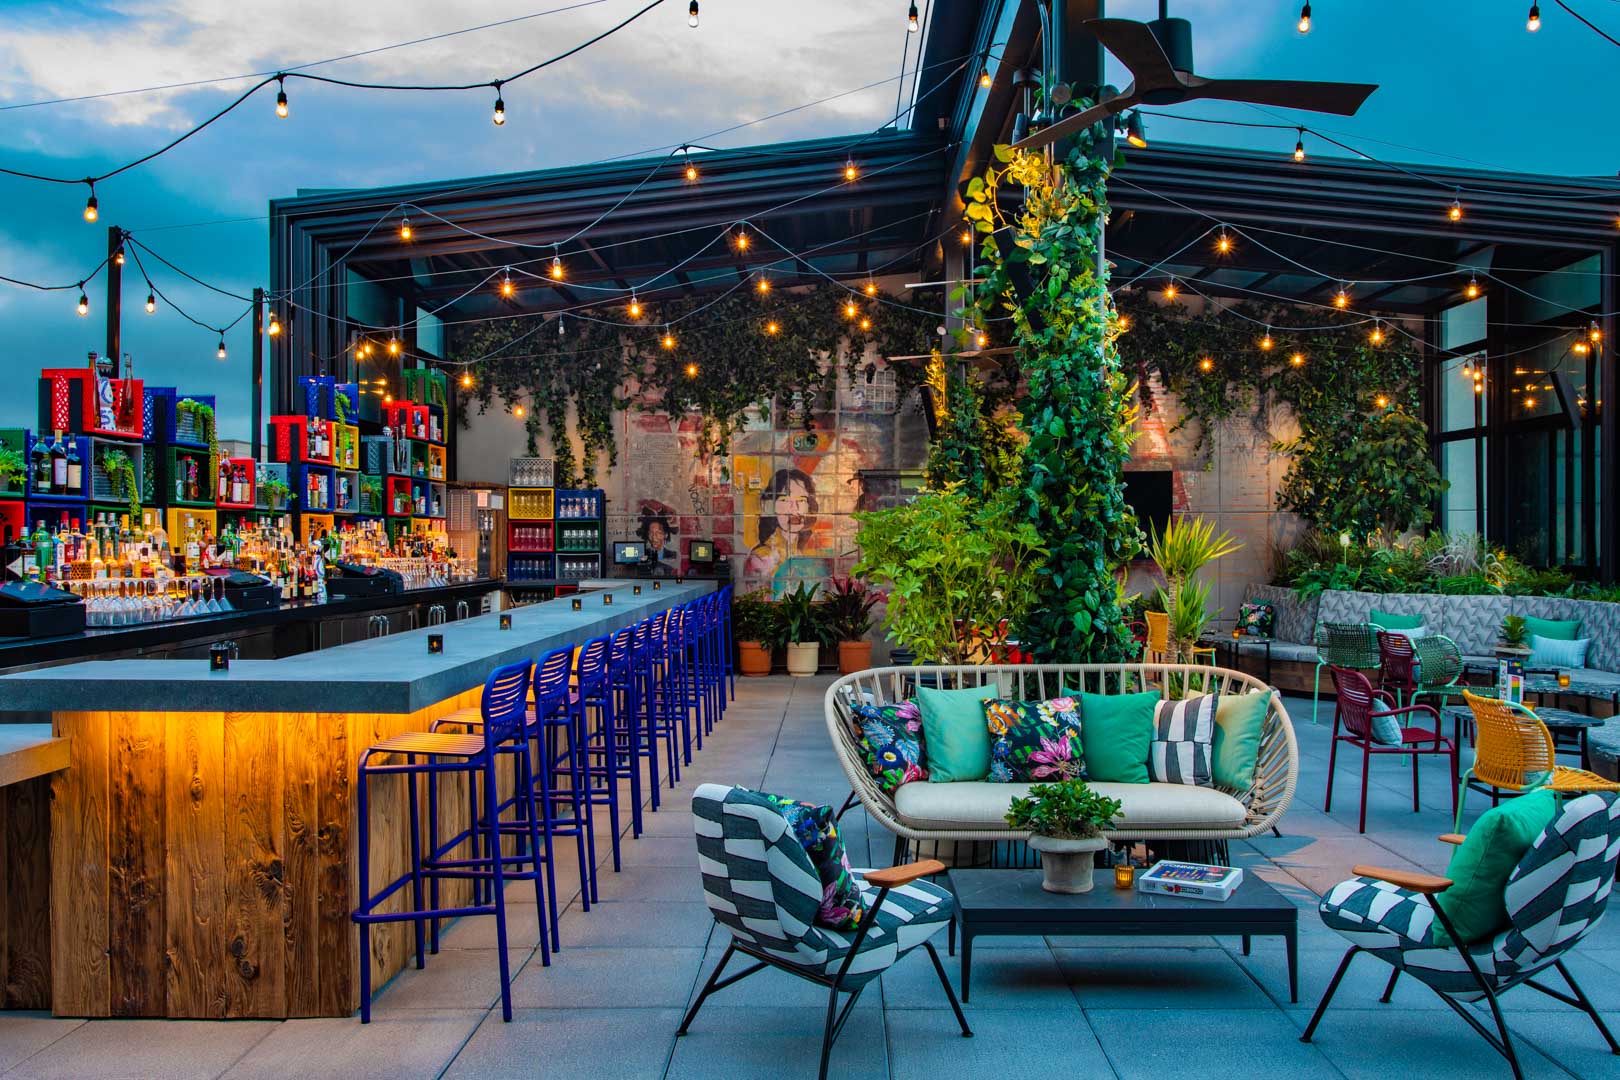 The Ready Rooftop Bar